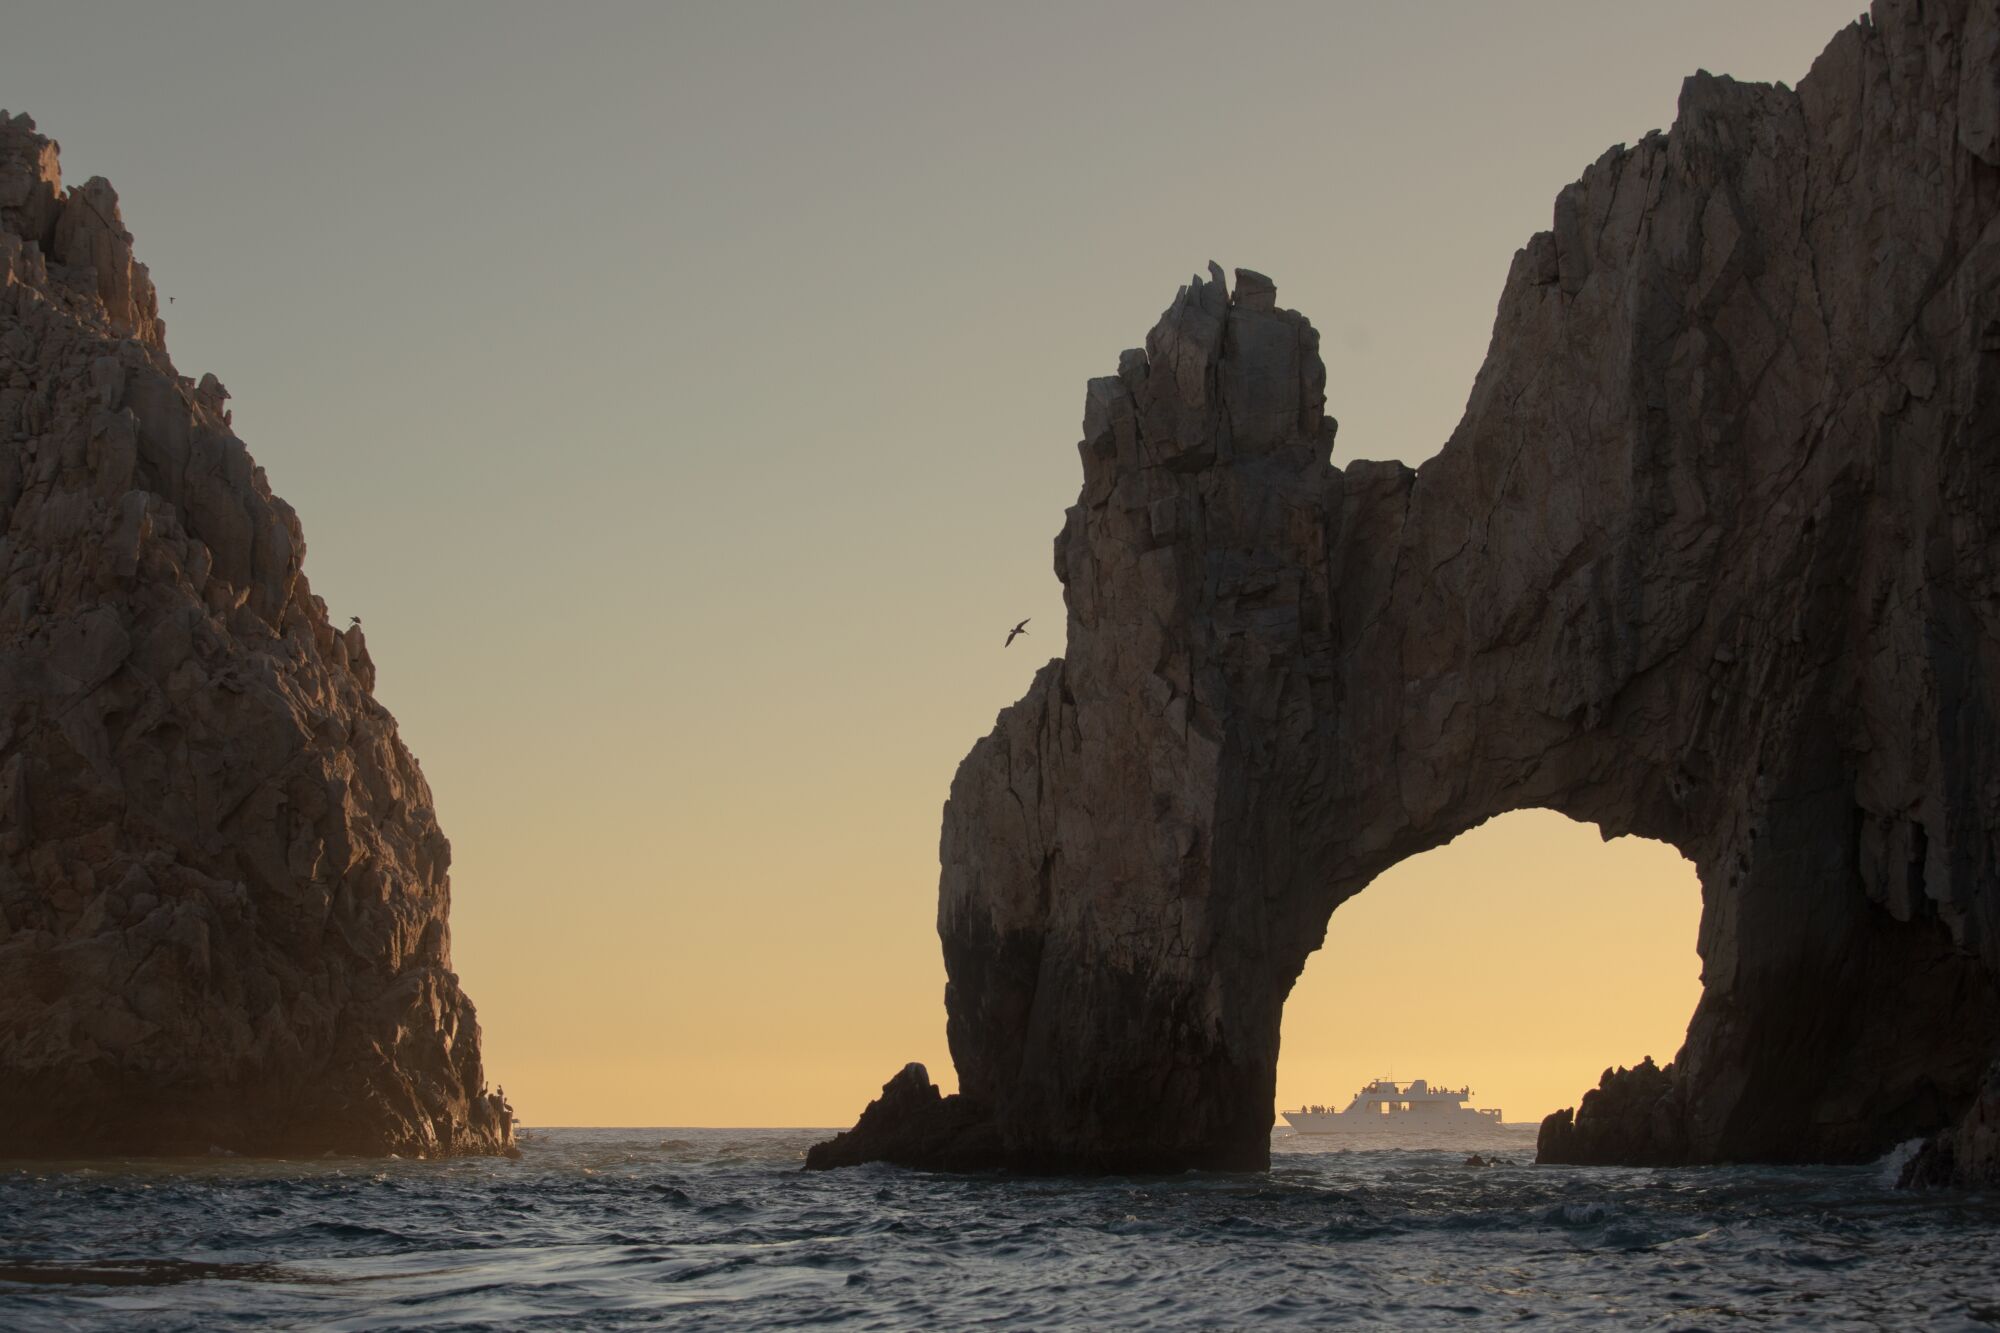 A sunset across an ocean scene featuring a natural rocky arch, which frames a boat further away along the horizon.